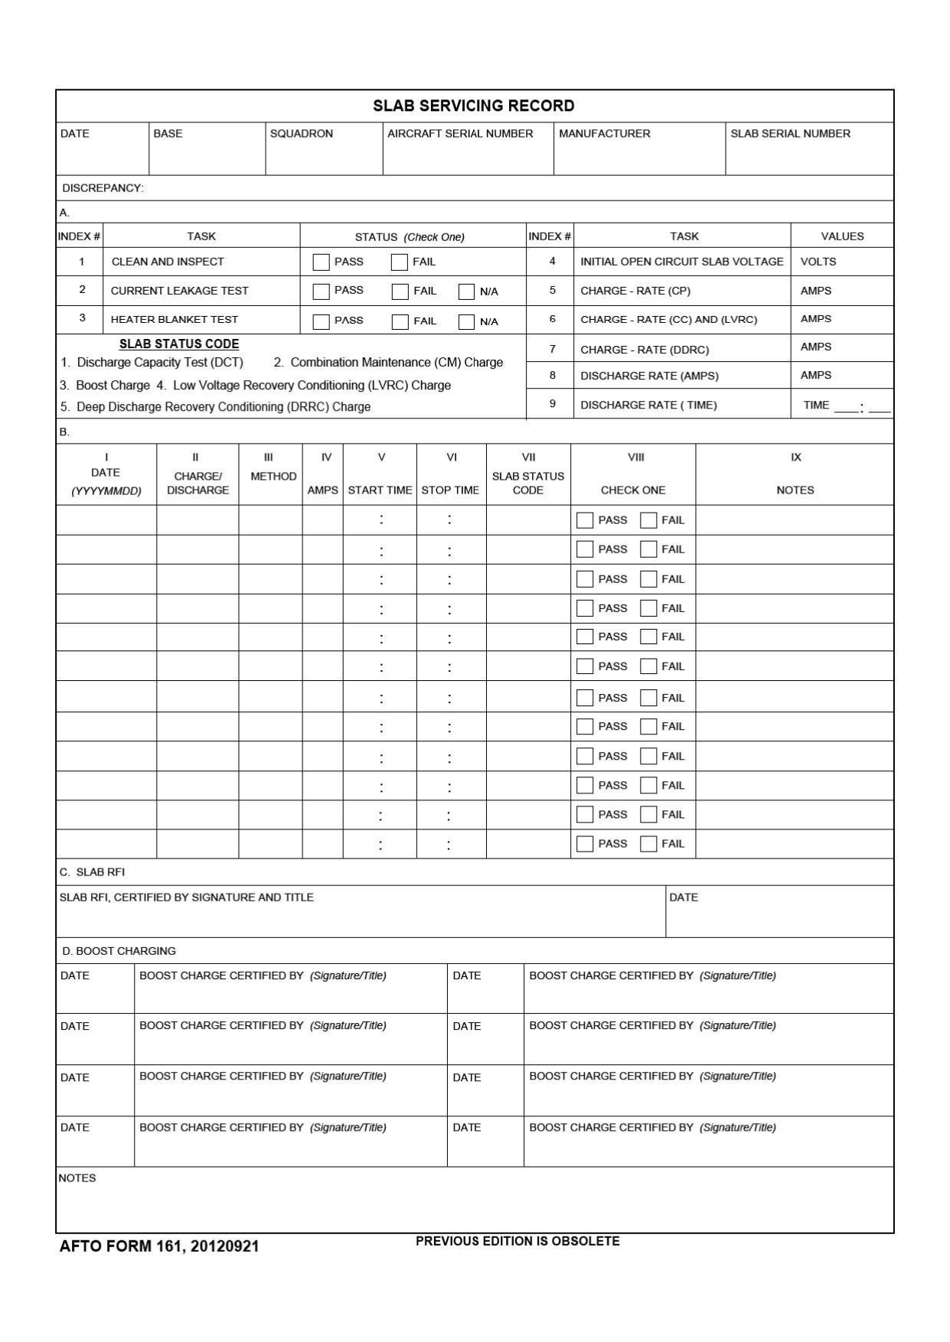 AFTO Form 161 Slab Servicing Record, Page 1